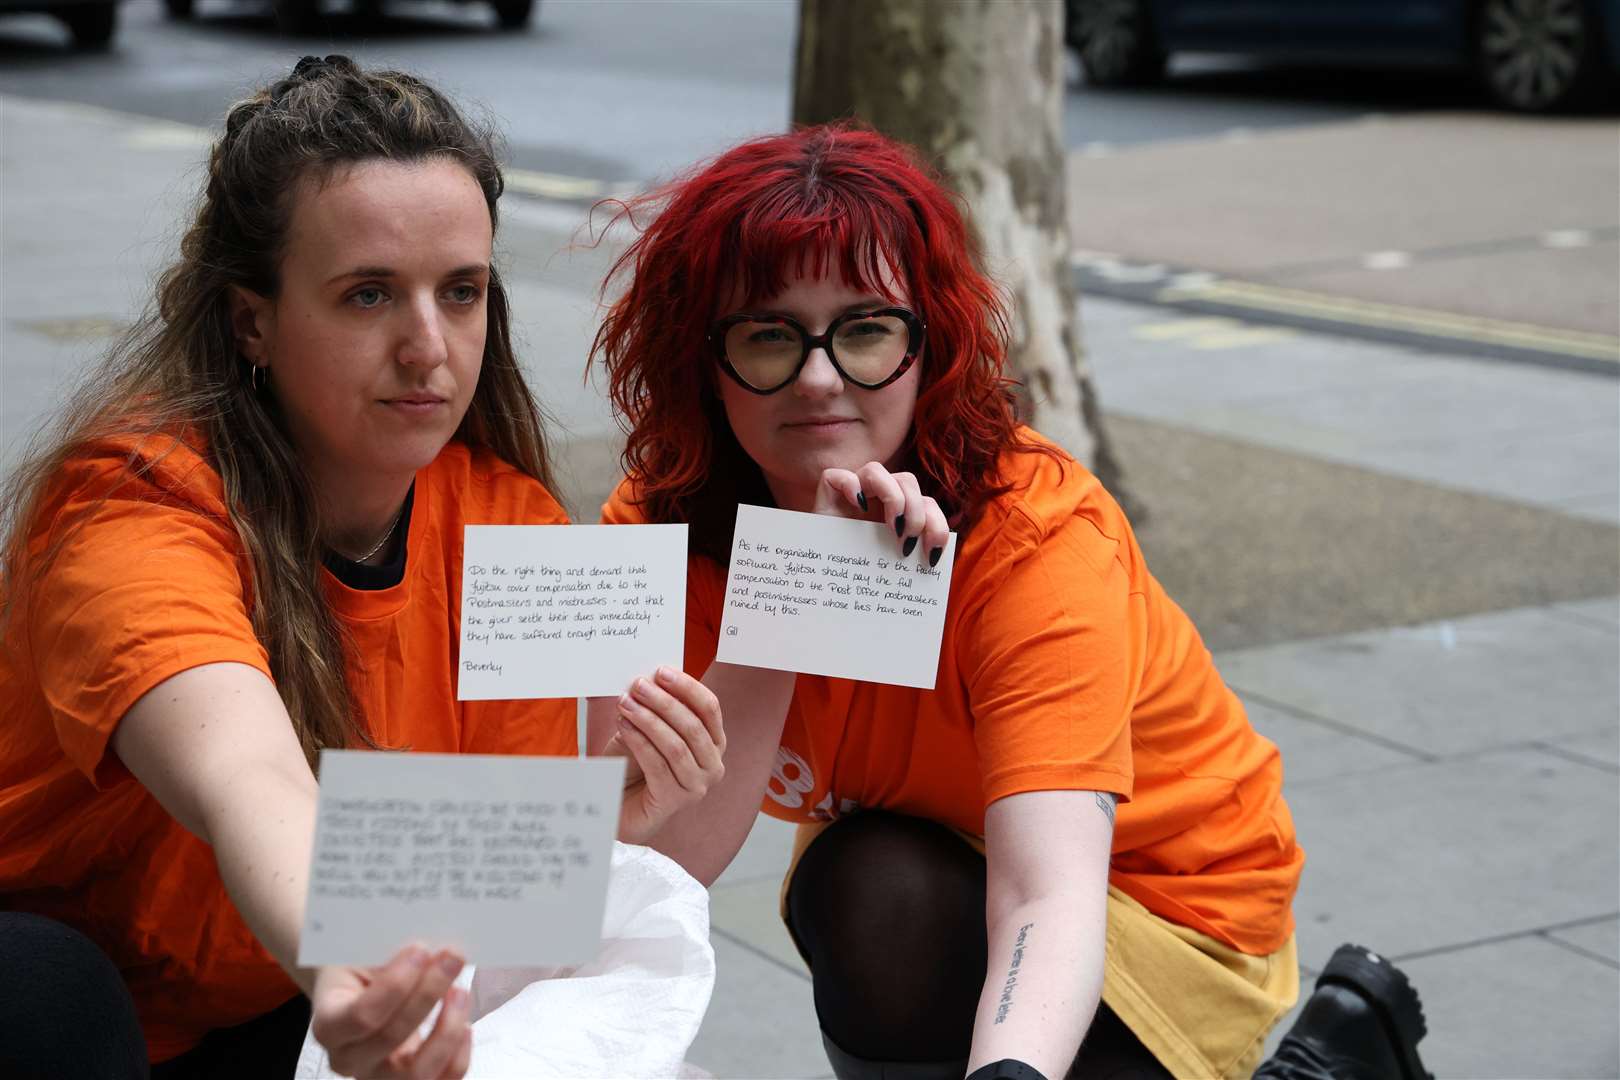 As the Post Office Horizon inquiry reopens, campaign group 38 Degrees delivers postcards from 10,000 members of the public, demanding full compensation for victims paid for by those responsible for the scandal (Nigel Howard/PA)